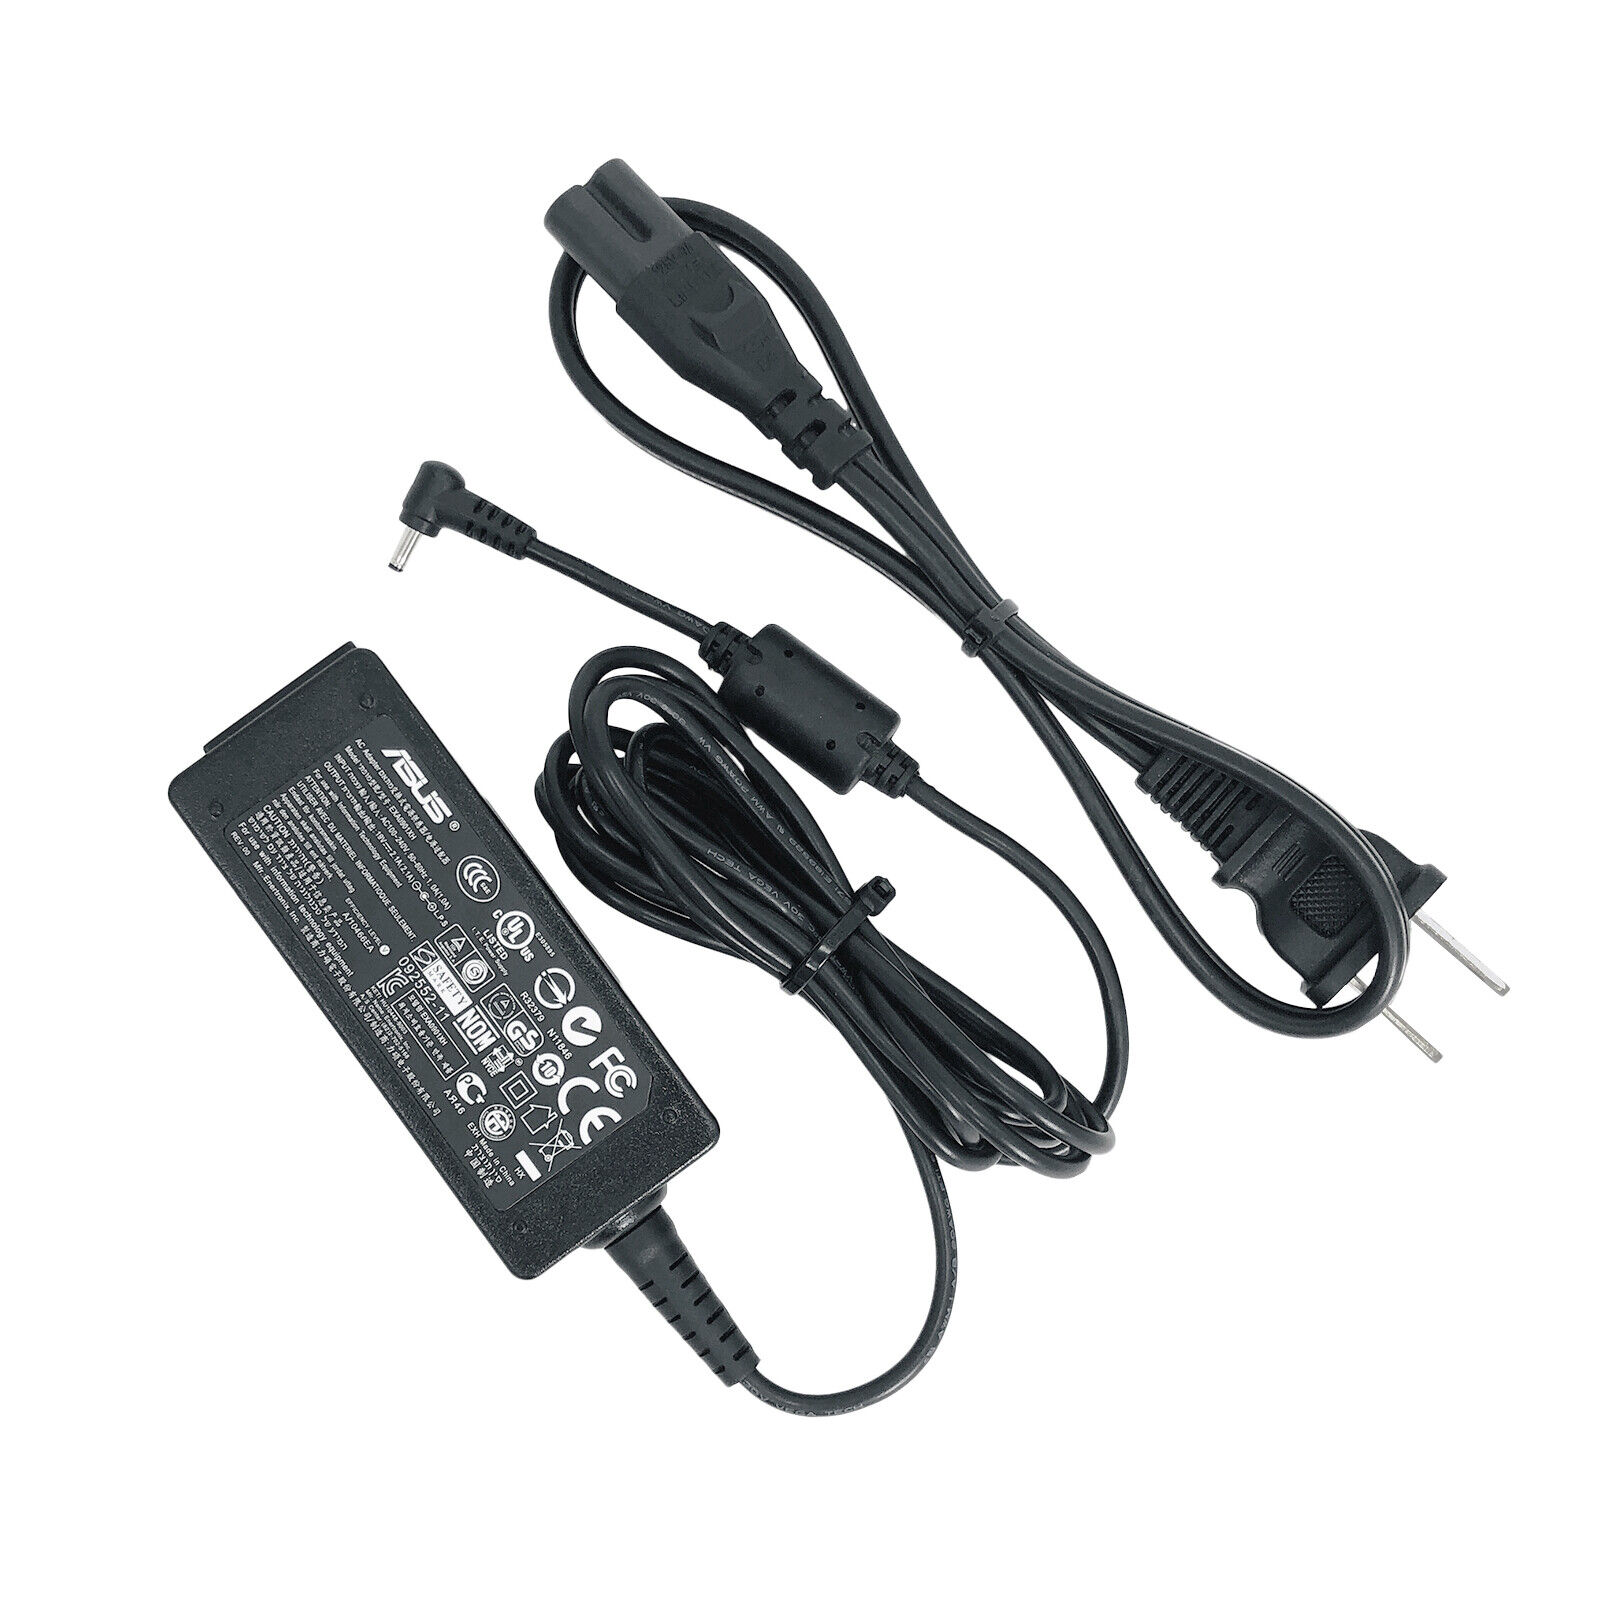 Genuine Asus AC Adapter for Eee PC 1015BX X101CH 1001X Laptop